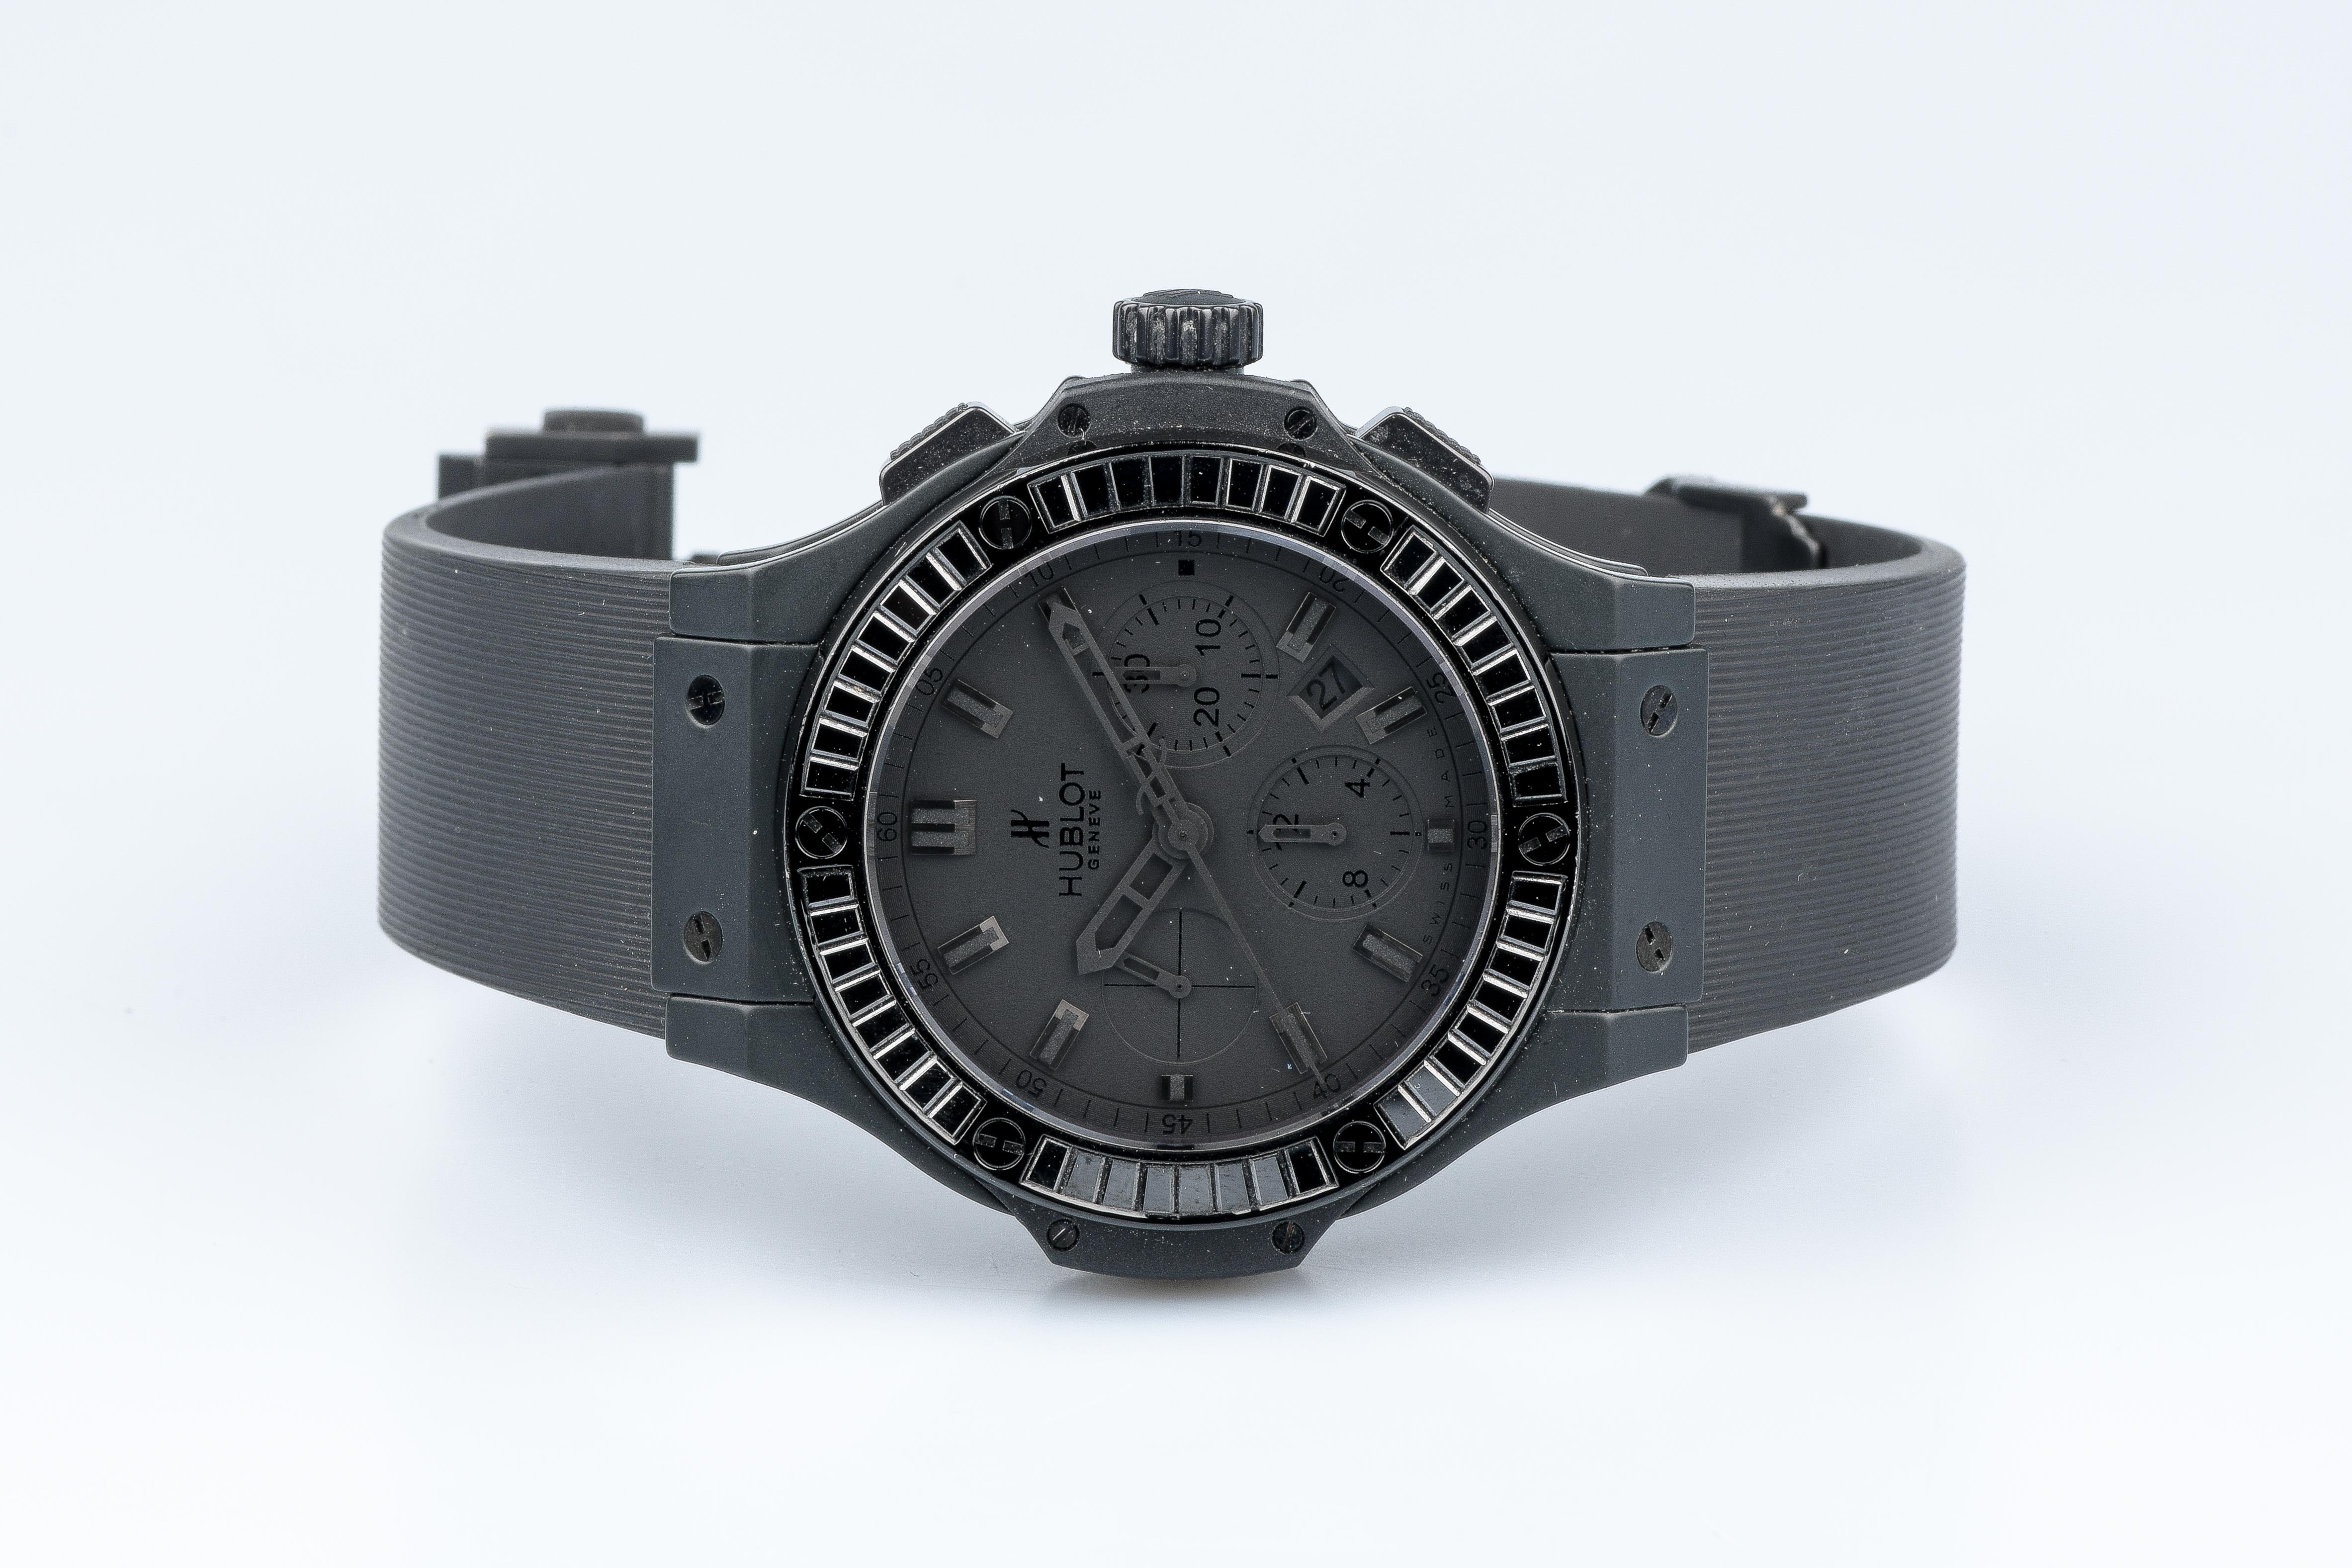 Hublot Big Bang All Black Chronograph watch in black ceramic designed with a black rubber bracelet and a folding buckle.

Black dial and sub-dial.

Bezel designed with 48 diamonds baguette cut and a transparent sapphire crystal at the case buttom.